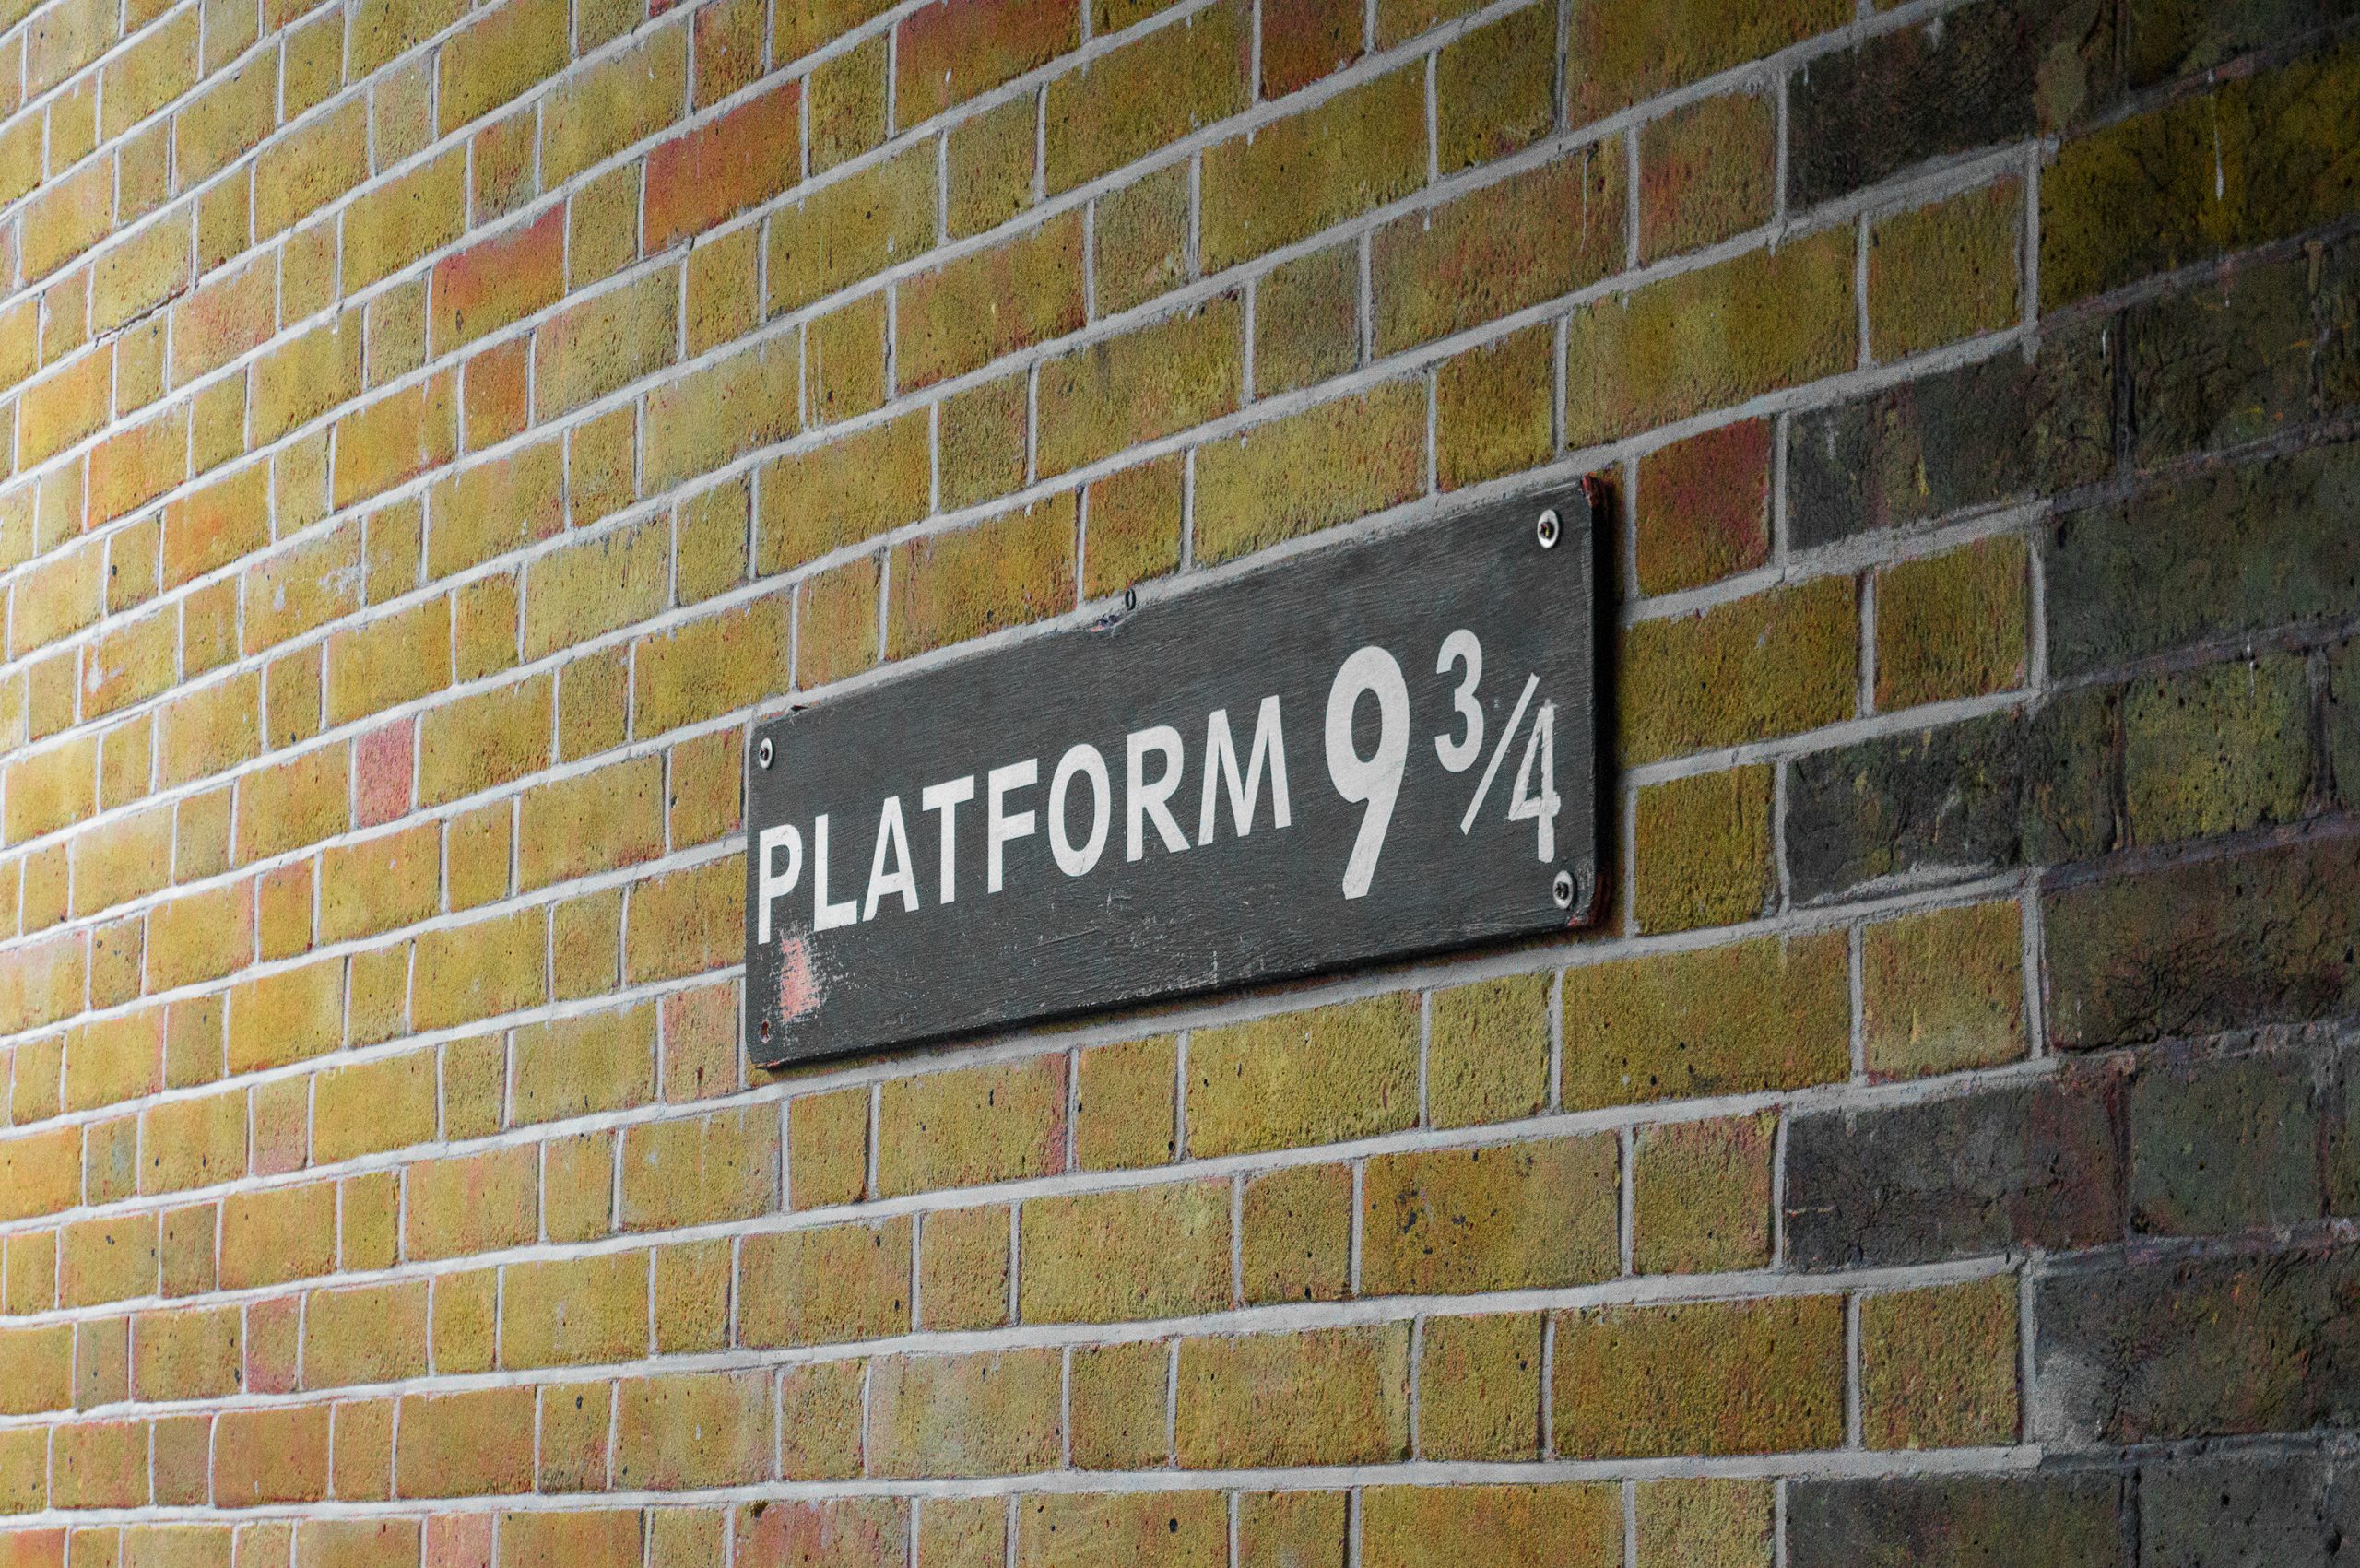 Things to do in London Harry Potter platform